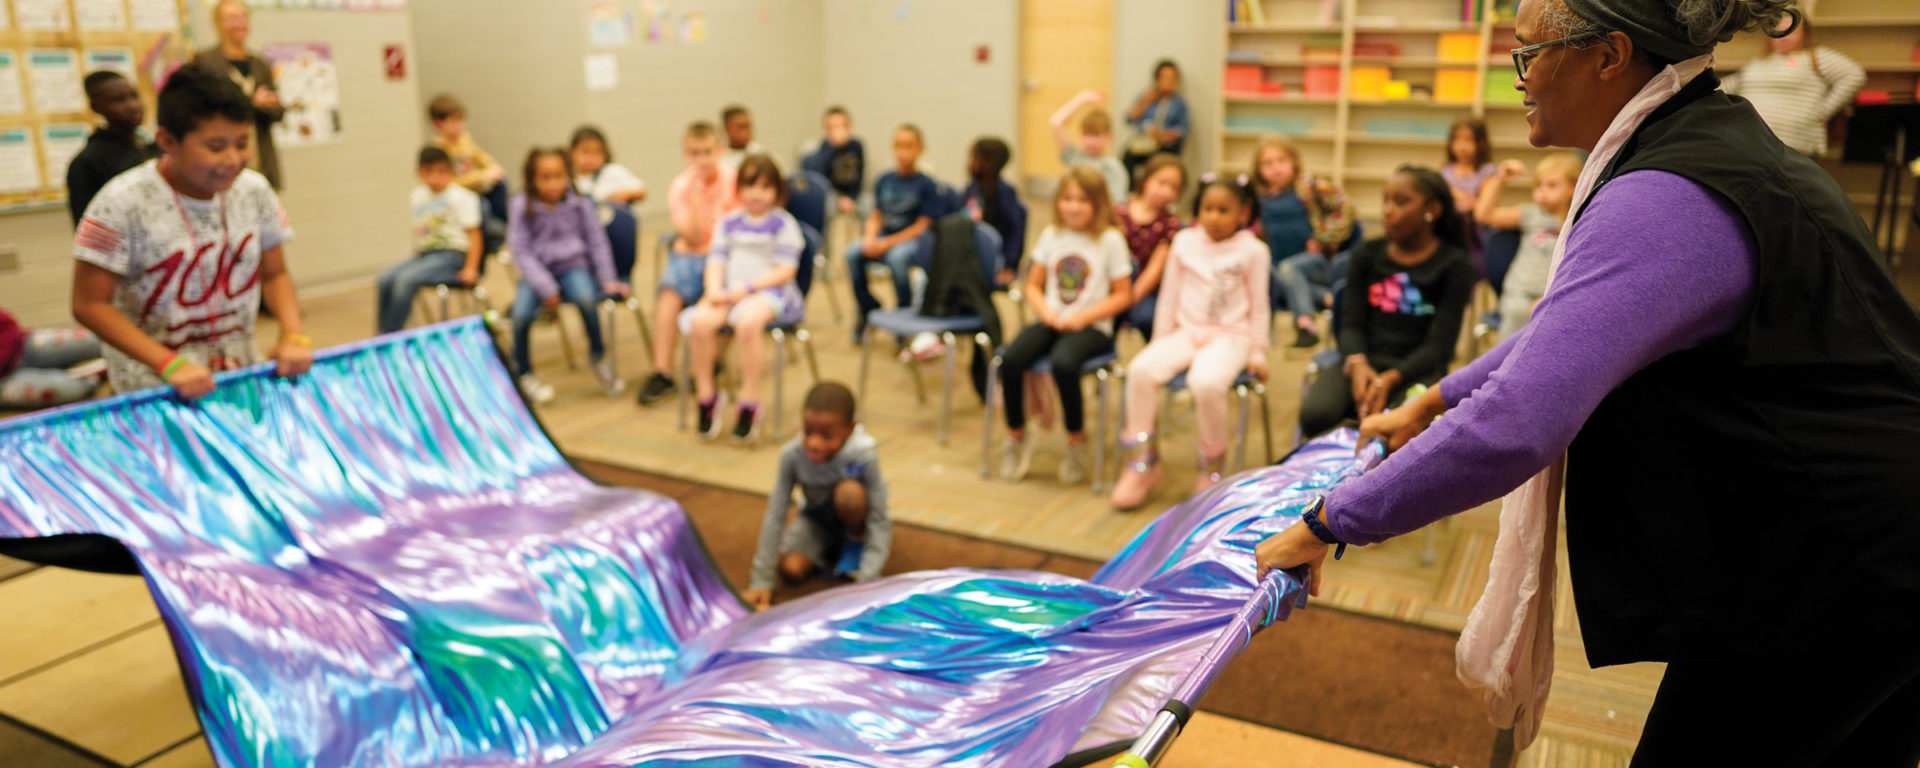 A student and teacher wave a rainbow tie-dyed banner in elementary school music class